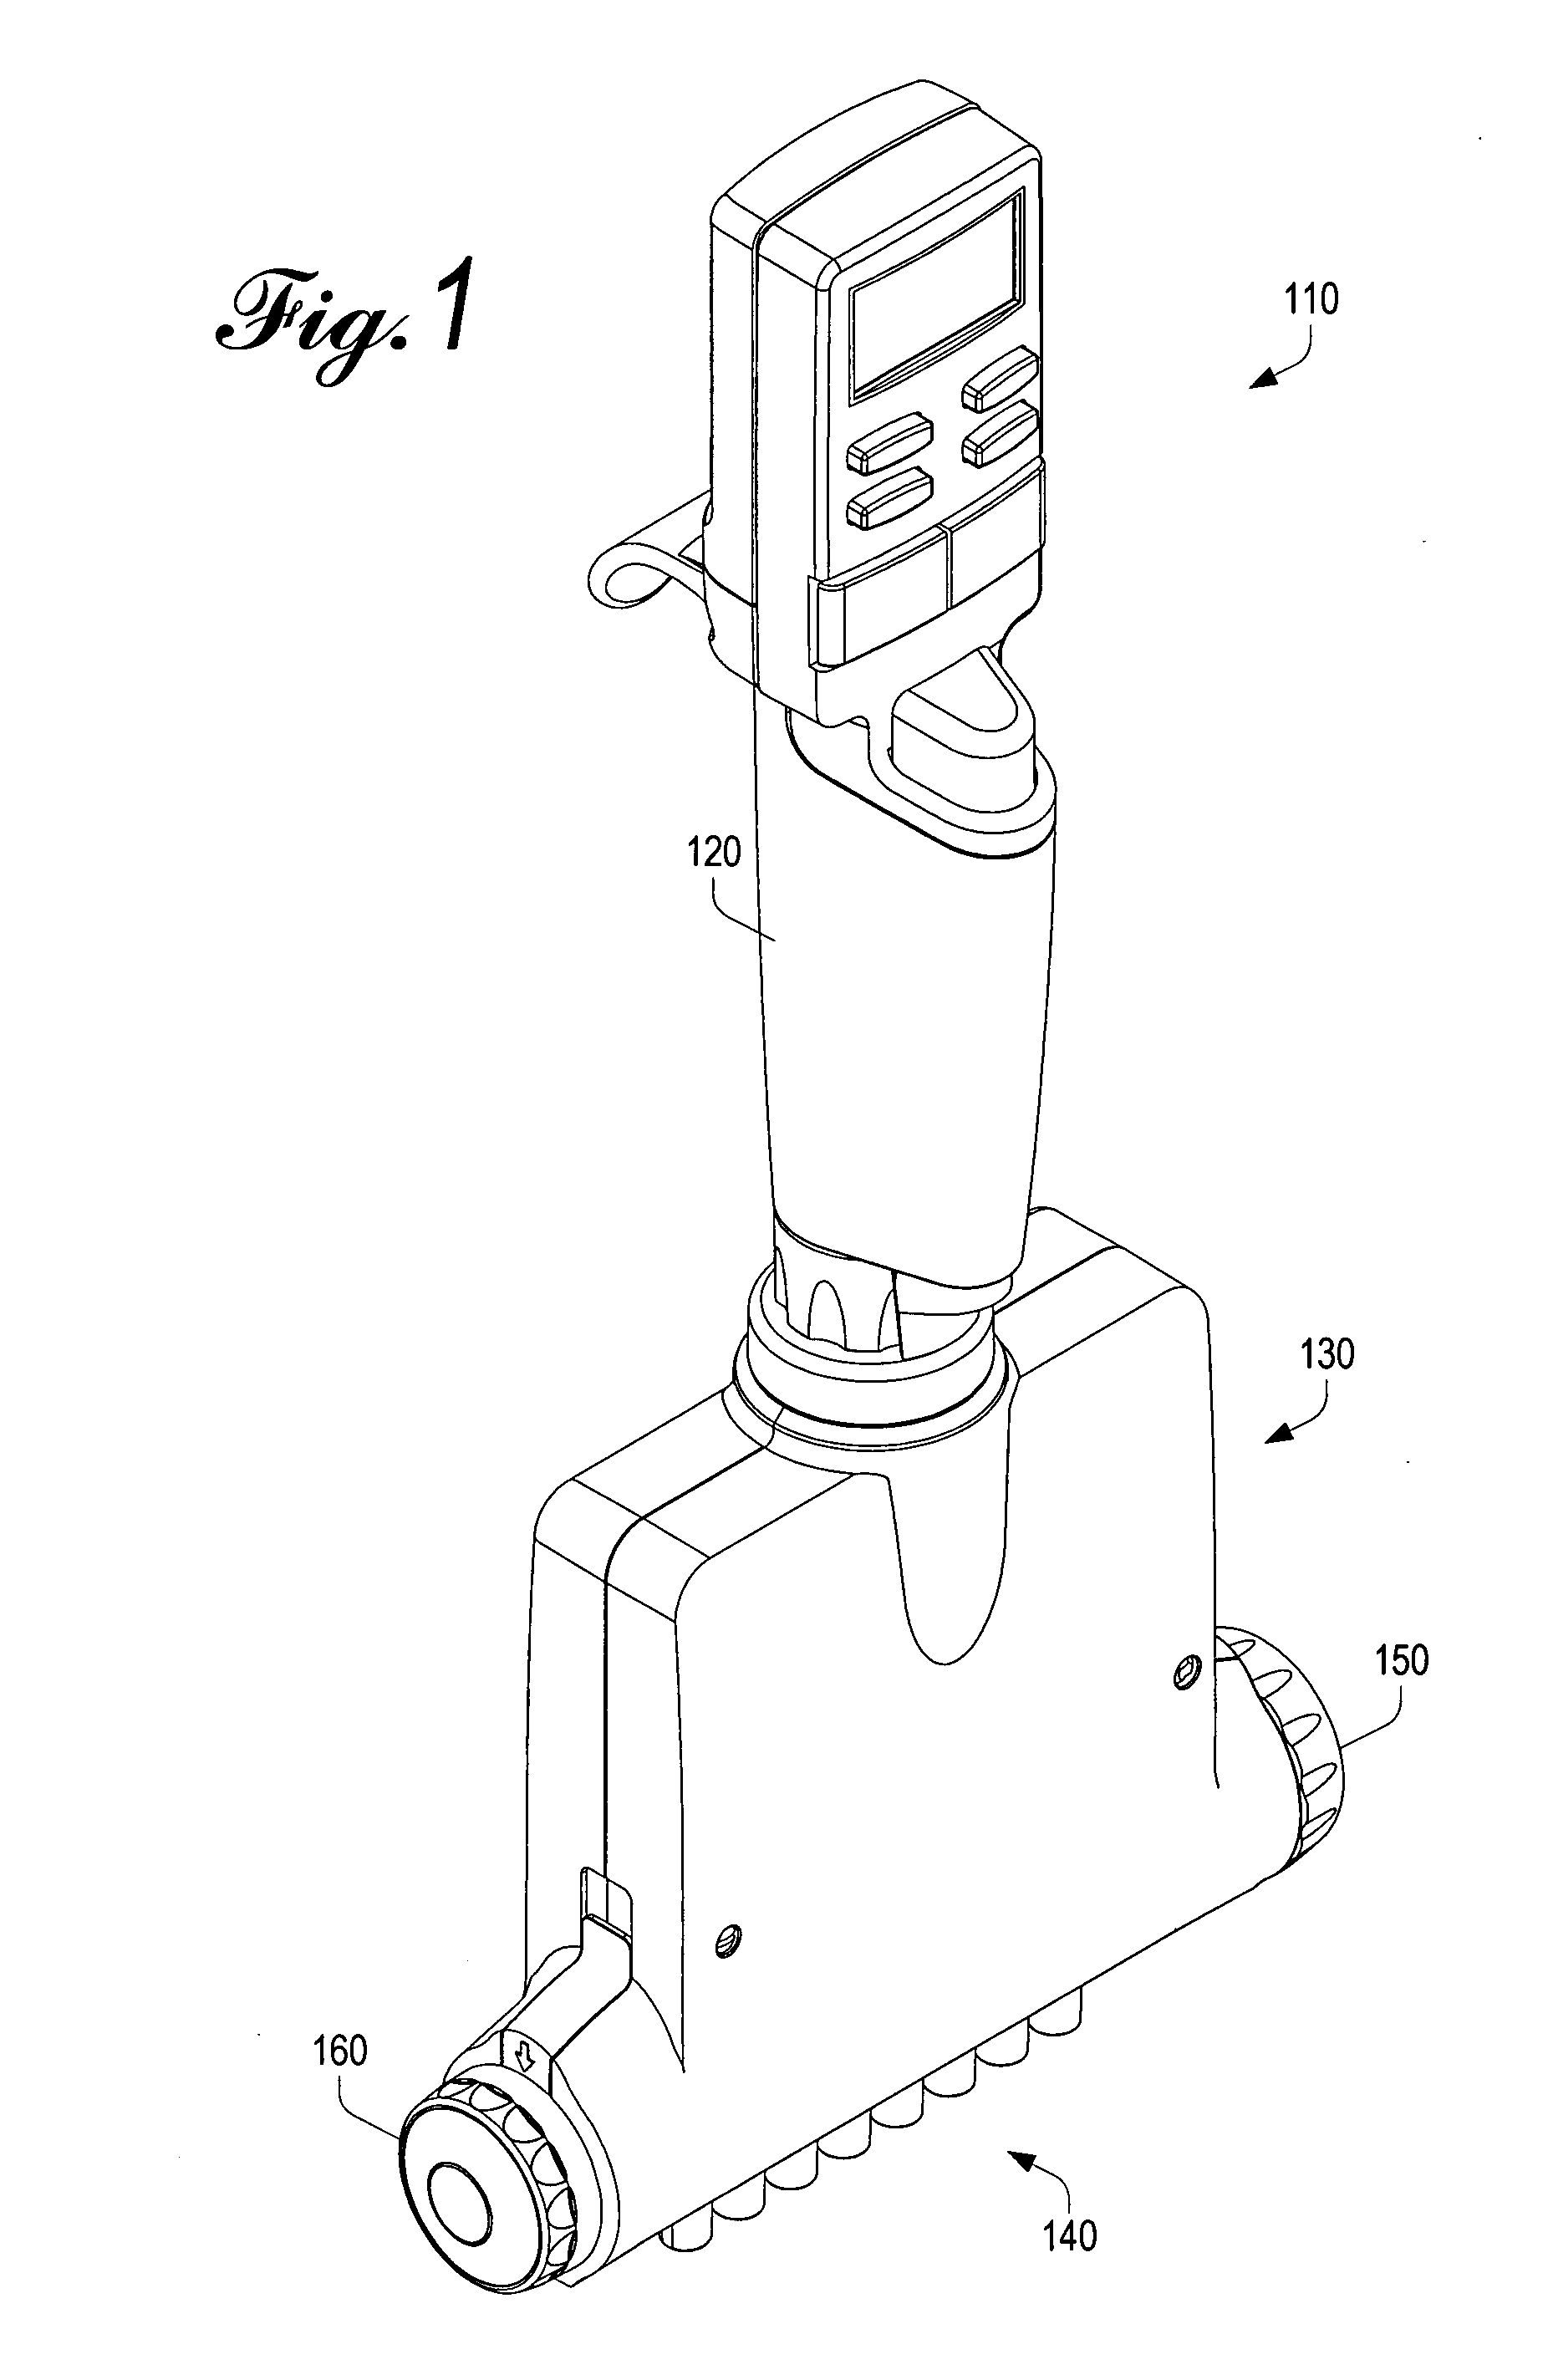 Liquid end assembly for a handheld multichannel pipette with adjustable nozzle spacing